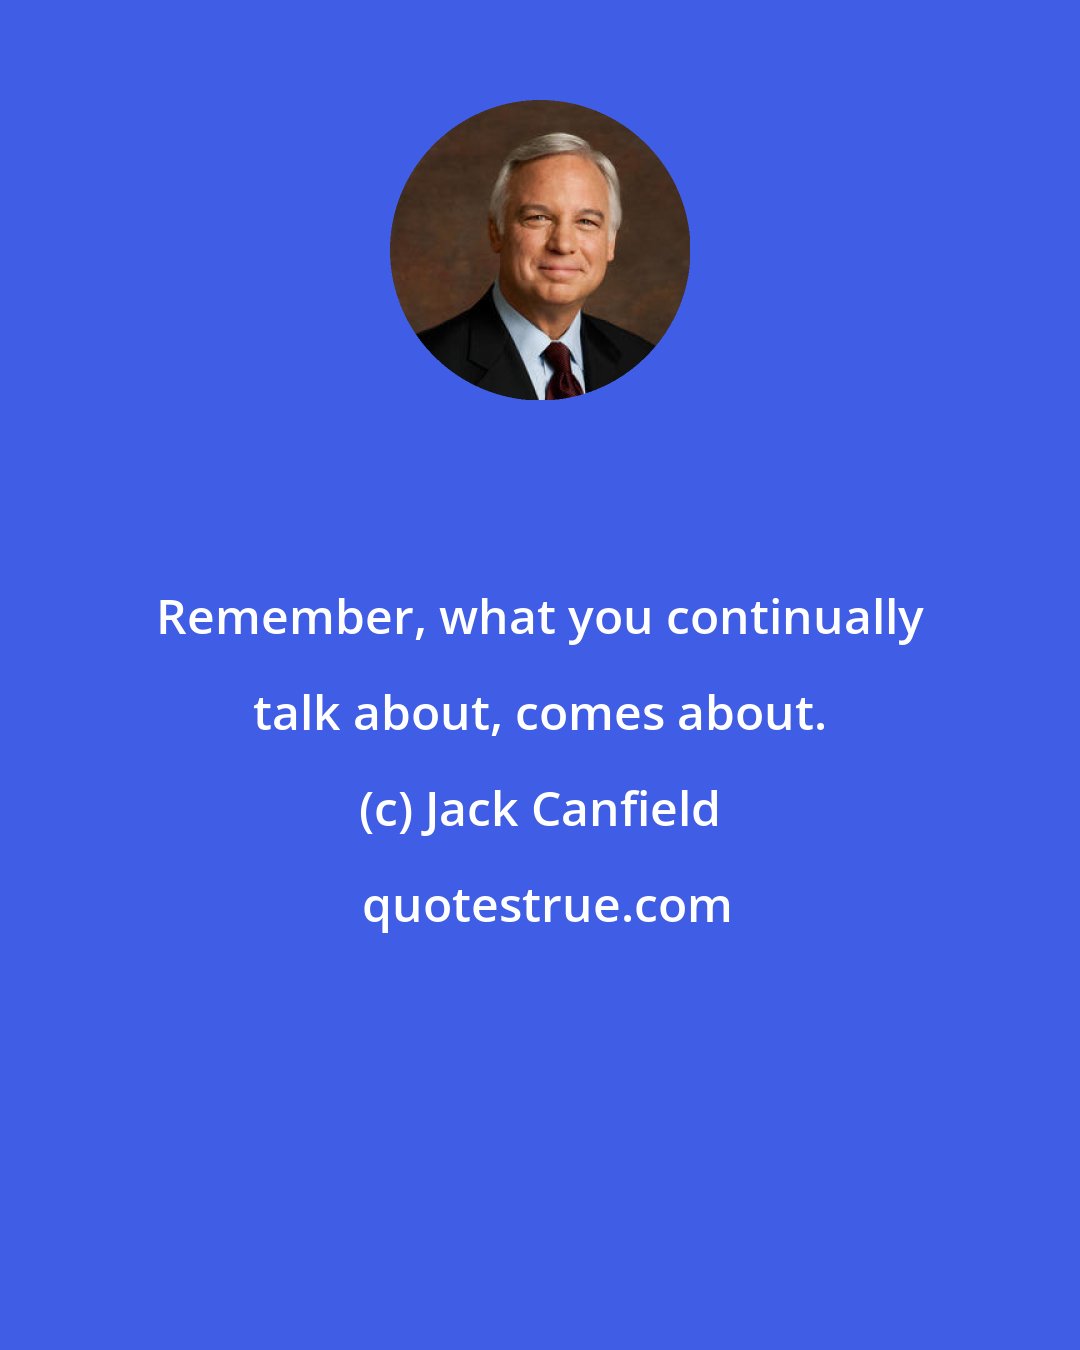 Jack Canfield: Remember, what you continually talk about, comes about.